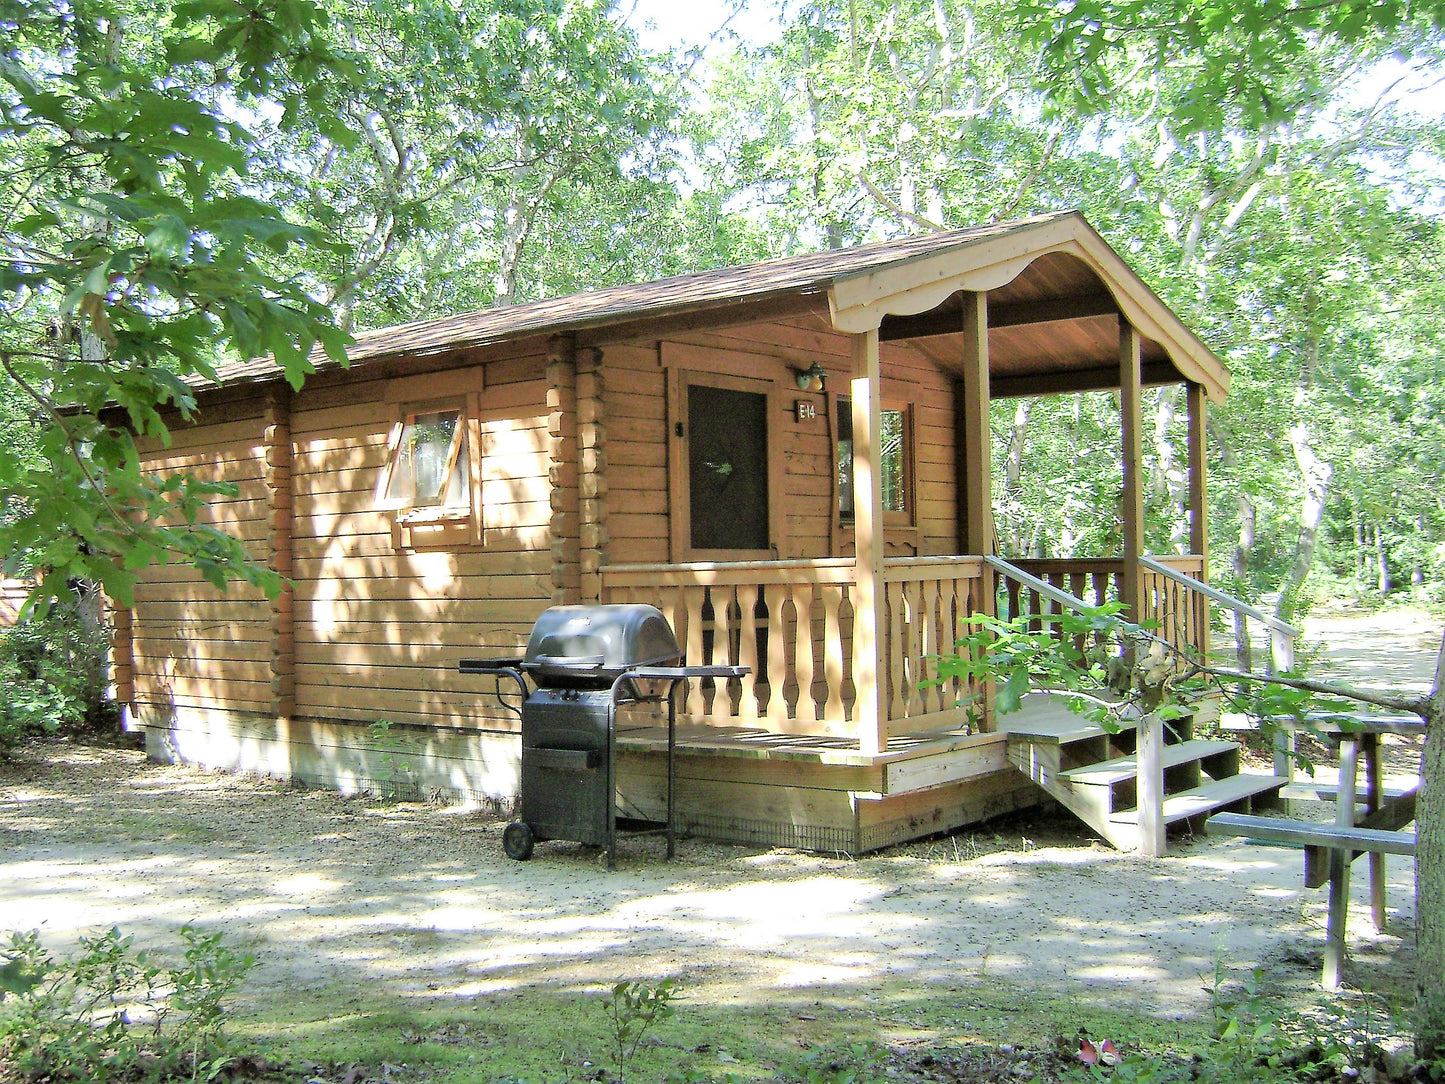 Additional Nights at One Room Cabin at MV Family Campground